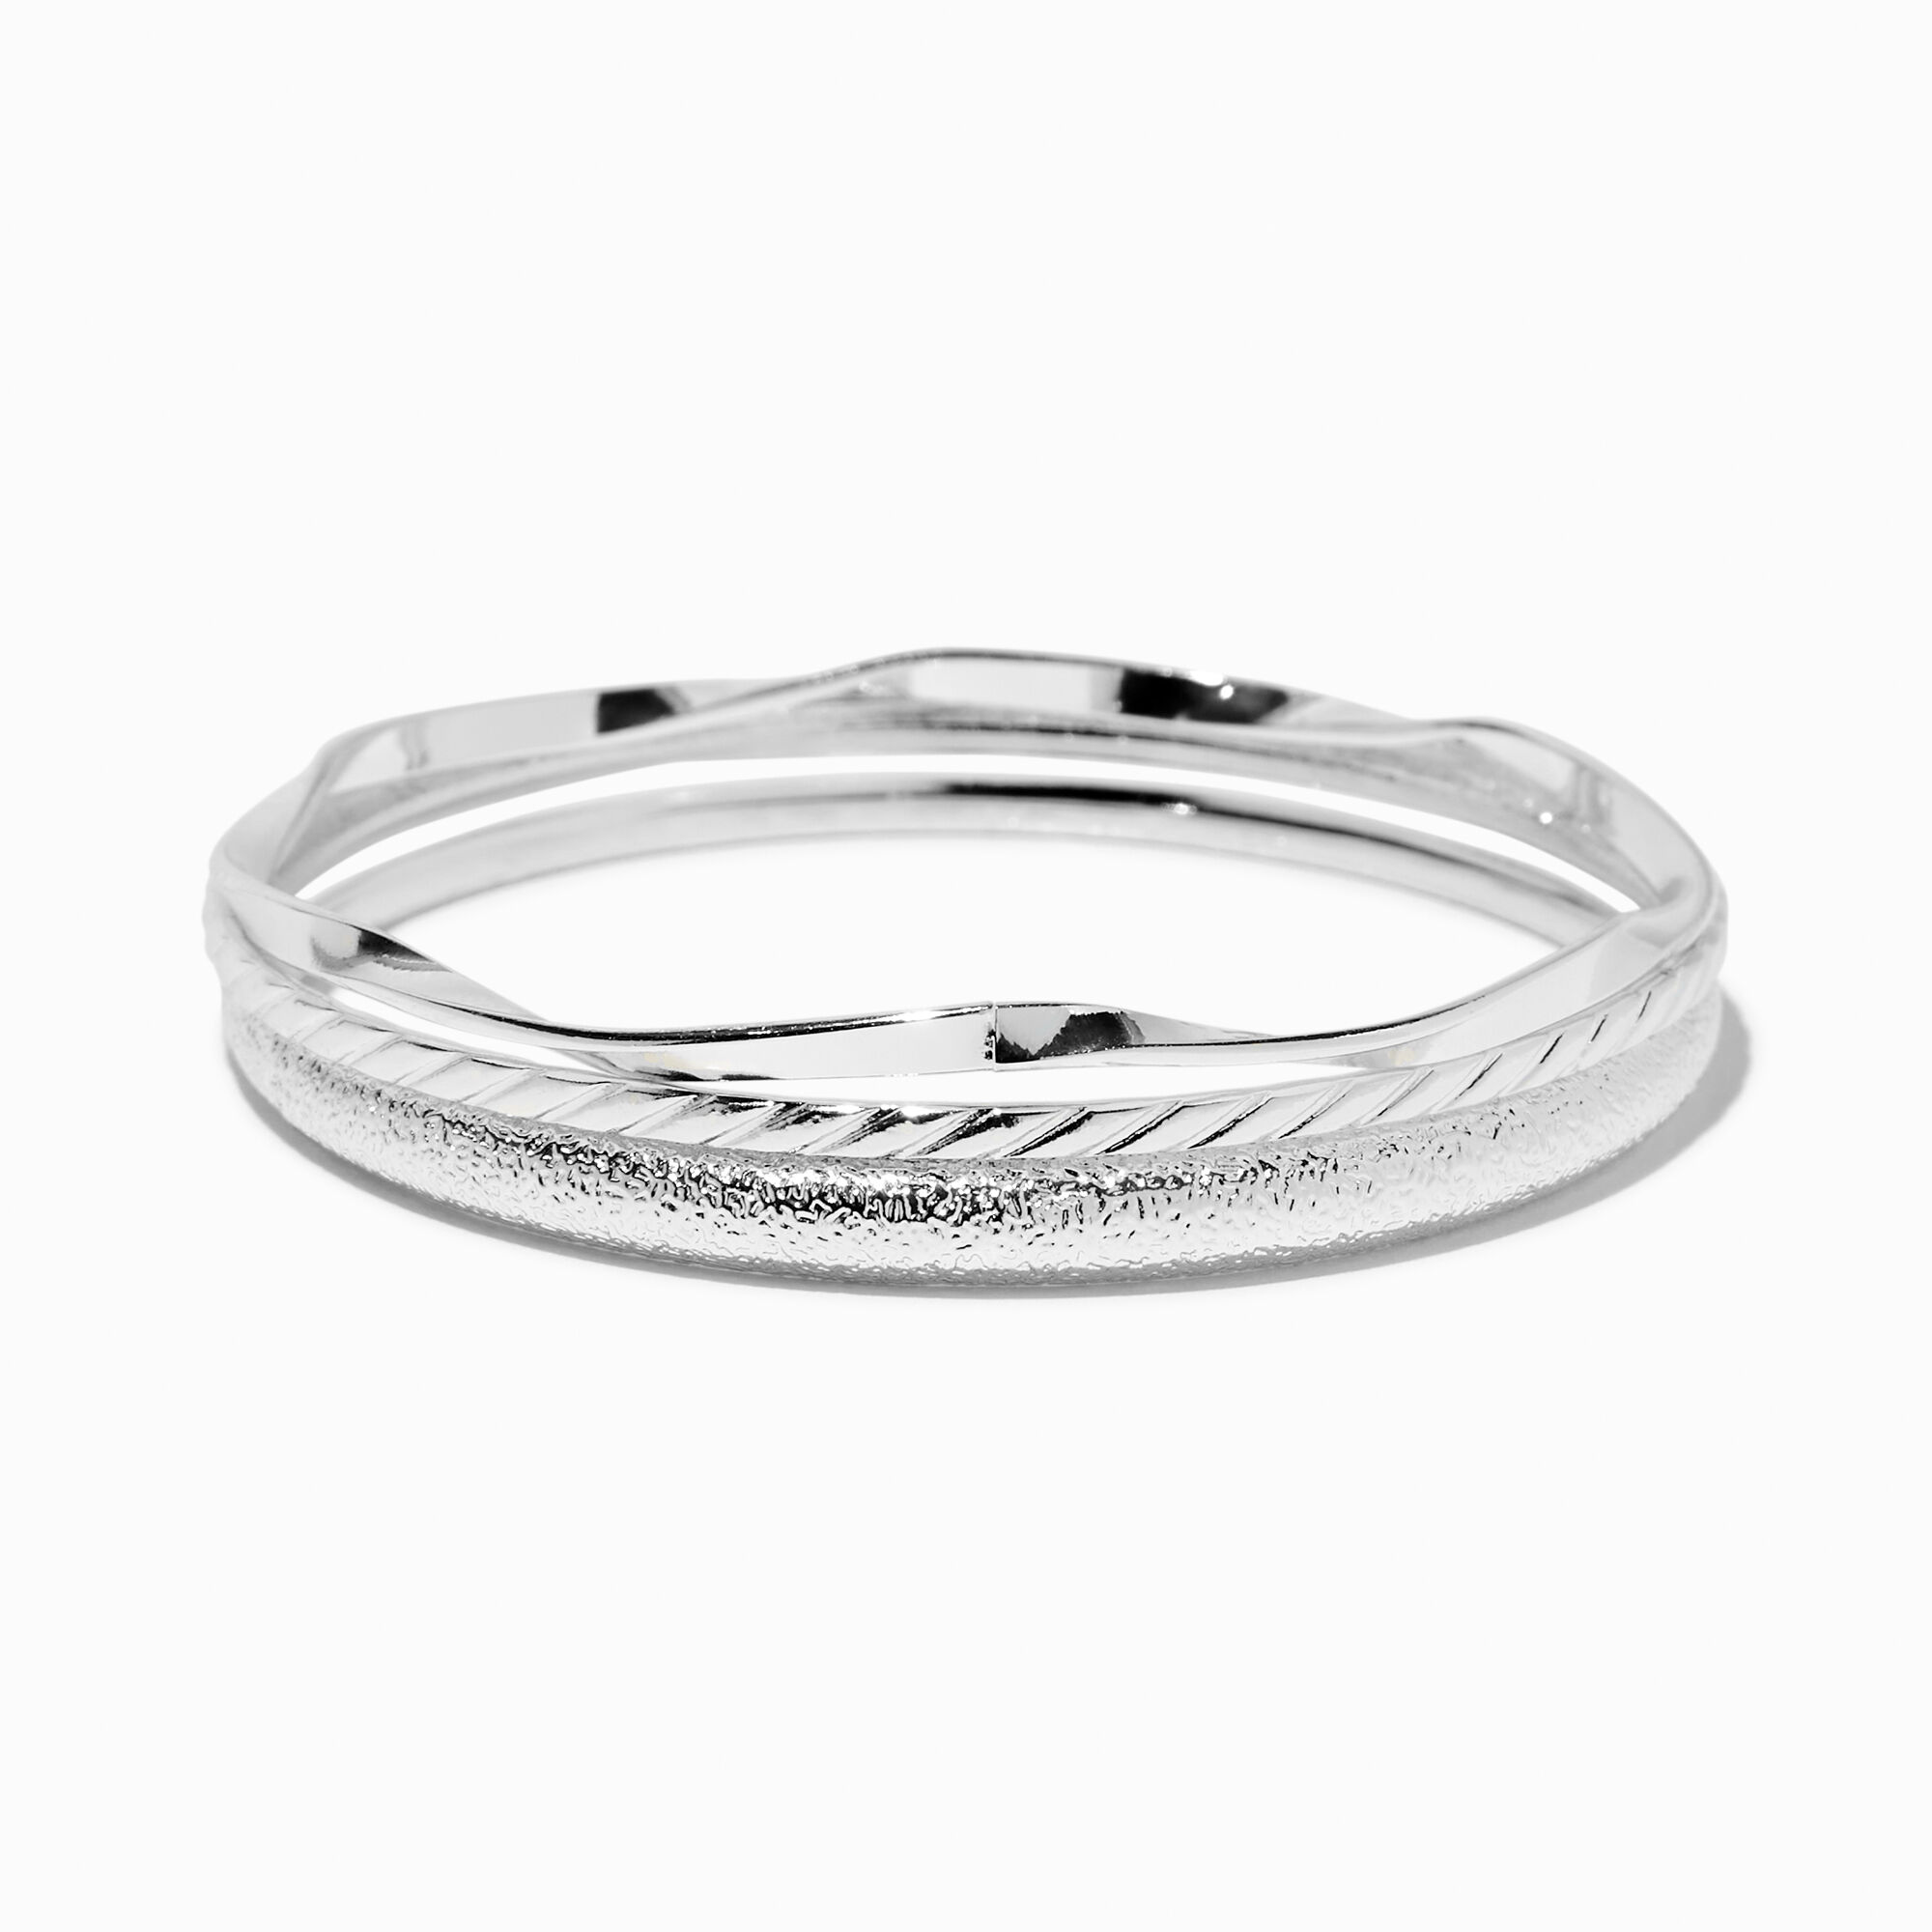 View Claires Tone Mixed Texture Bangle Bracelets 3 Pack Silver information